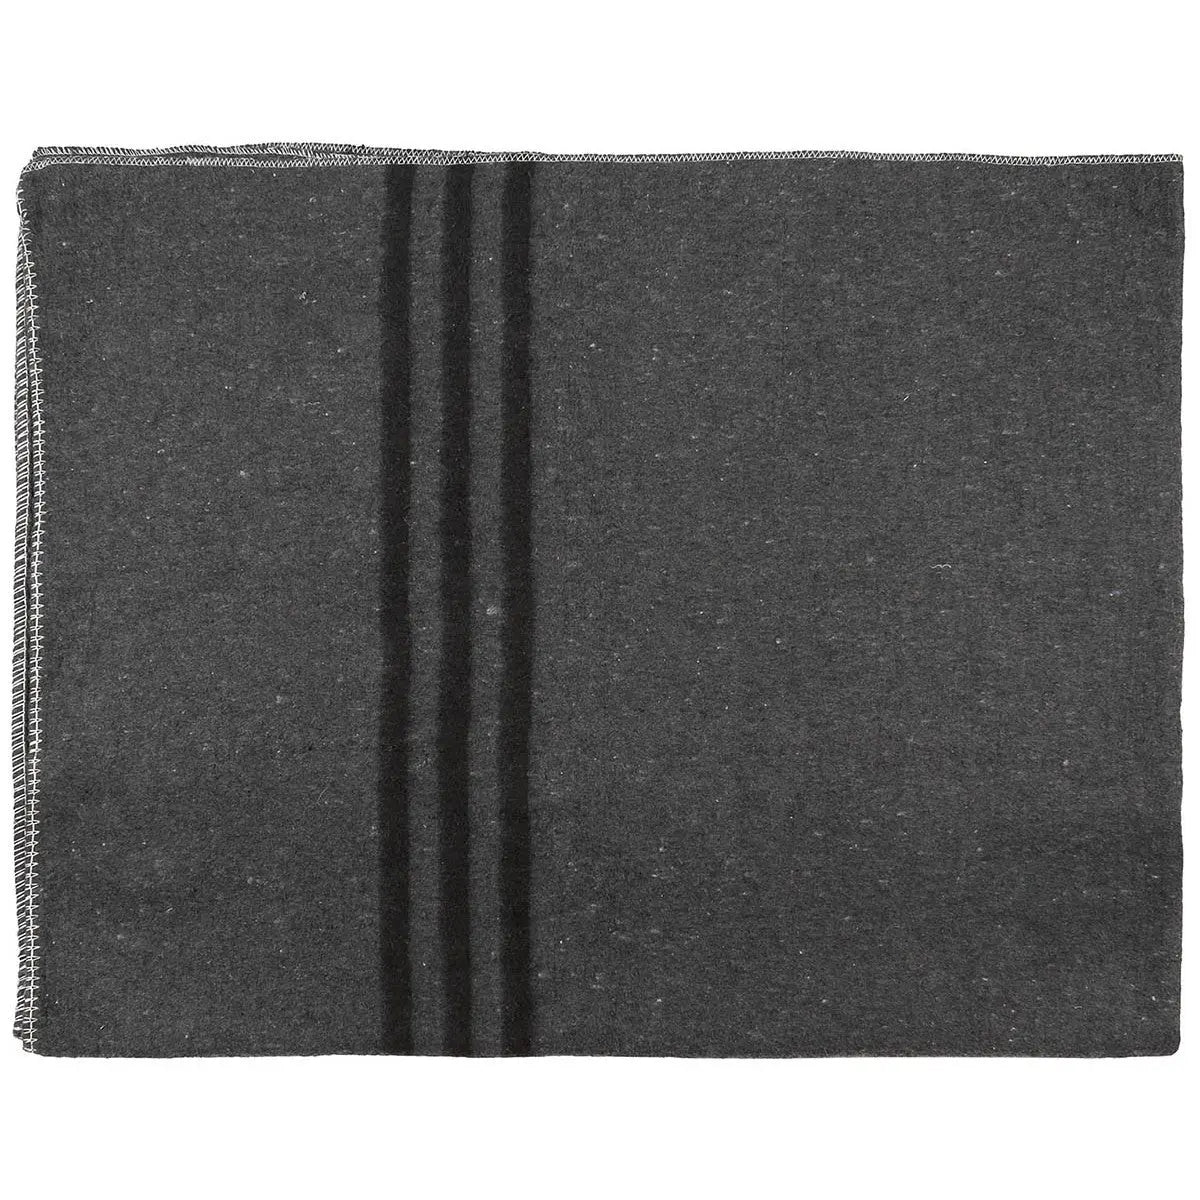 Bivouac Blanket, anthracite, ca. 200 x 150 cm NSO Gear